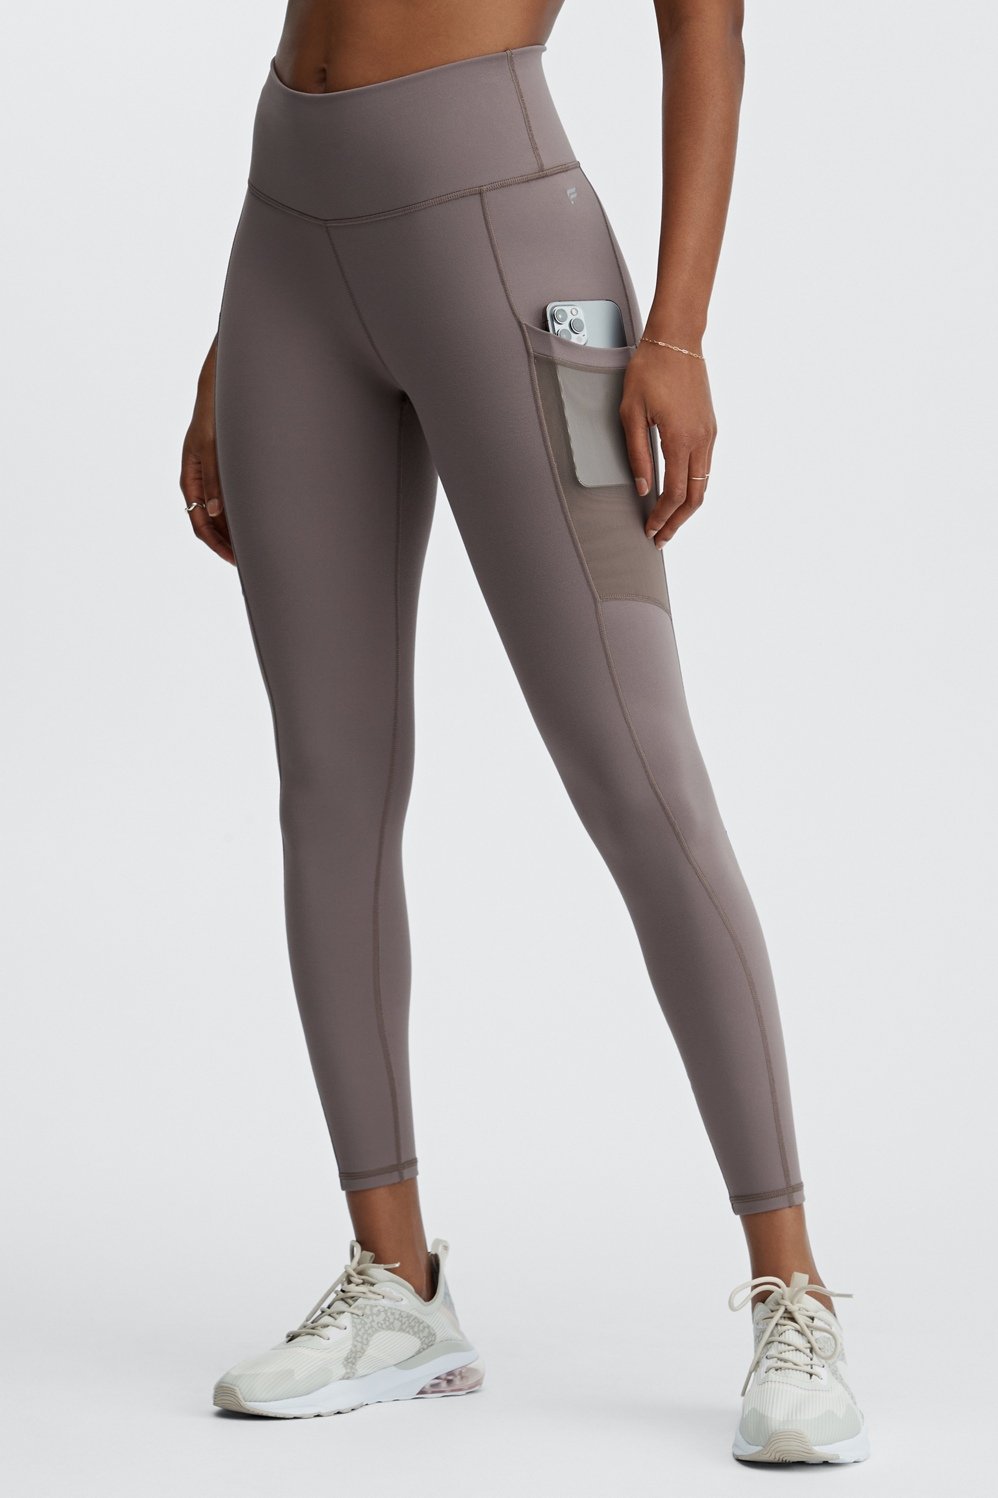 The leggings 23,000+  shoppers are obsessing over are down